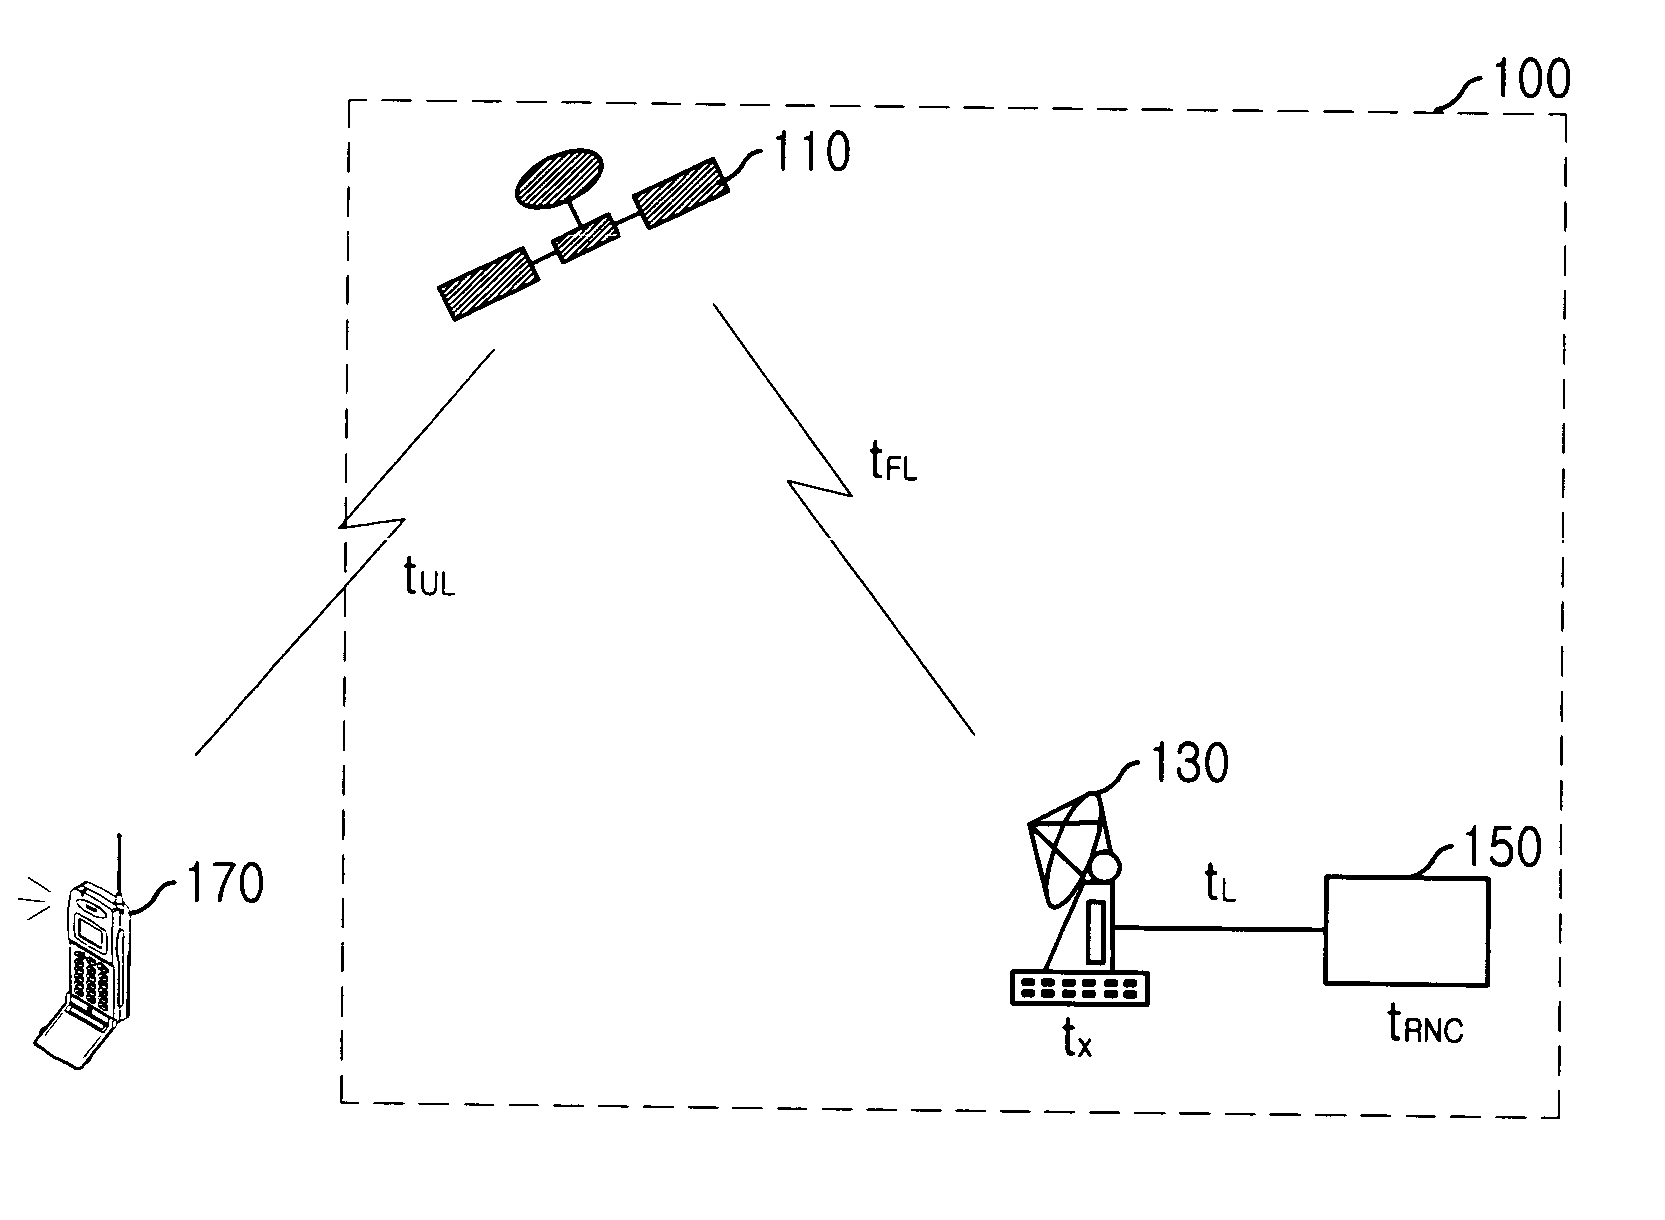 Random access channal access apparatus for mobile satellite communication system and method therefor